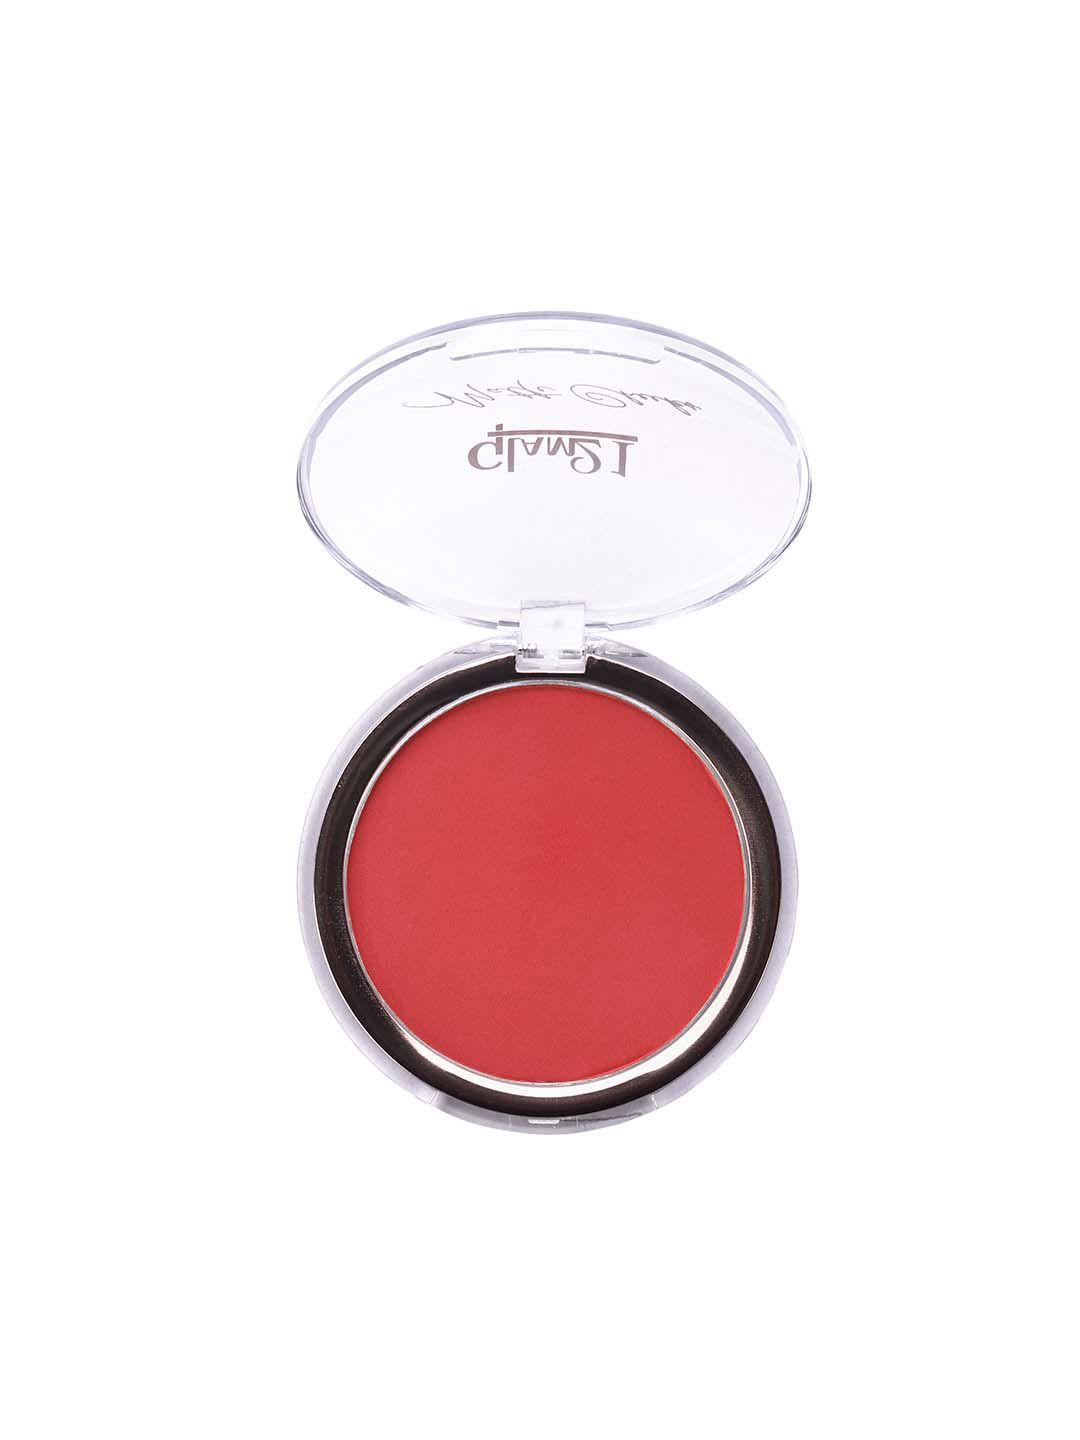 glam21 matte cheek perfect pop of color blush 5 g - shade 05